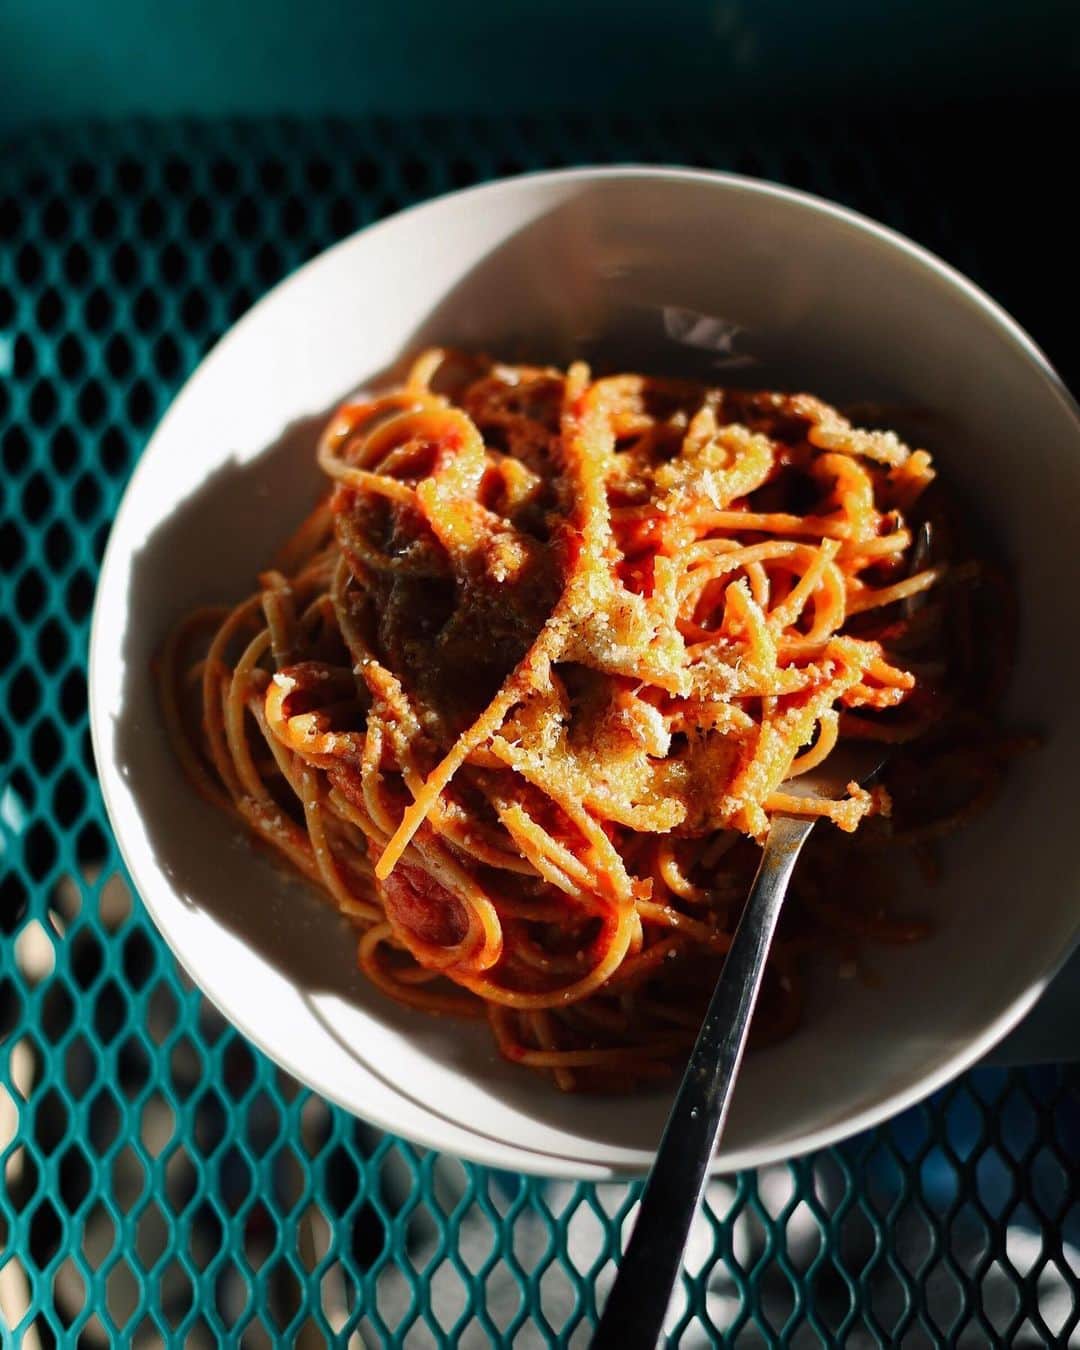 Saghar Setarehさんのインスタグラム写真 - (Saghar SetarehInstagram)「Phase 2: My sleep and meal hours are still off the clock, and my crave for comfort food are still somewhat the same as phase 1. So my lunch/dinner was this big bowl of spaghetti with tomato sauce (made slowly from scratch). It was some time before 7 pm and the now mighty sun was shining brightly through the ajar window. ⠀⠀⠀⠀⠀⠀⠀⠀⠀ As I one-handedly pushed my dear turquoise Ikea trolly (that has mercifully saved me from eating at my tiny kitchen) towards the table, a ray of sunshine dropped into my bowl of spaghetti and mingled with the cheese and tomato sauce, and at the moment I knew phase 2 had truly begun for me too; I sat down and rested the crutches on the bookcase as I always do. I took the camera from the table and I snapped one shot of the sunlit bowl of pasta. When I finished, I took another photo from the empty bowl. ⠀⠀⠀⠀⠀⠀⠀⠀⠀ It had been more than two months that I hadn’t held my camera. ⠀⠀⠀⠀⠀⠀⠀⠀⠀ I’m restless and hopeful that I will be given permission to walk in 2 days. The first thing I’ll do will be taking some steps around the block. The streets of Rome are still rather empty (from what I see from people’s photos), and I’m aching to be there, among those very few people who are cautiously going out. ⠀⠀⠀⠀⠀⠀⠀⠀⠀ Another thing I’m looking forward to do which I haven’t done in more than two months: Wearing make up (those 2 times I put on lipstick for Zoom calls don’t count). ⠀⠀⠀⠀⠀⠀⠀⠀⠀ Slow, cautious, but forward. One step at a time. ⠀⠀⠀⠀⠀⠀⠀⠀⠀ #Fase2 #IoRestoACasa #MySweetQuarantine  #🍝 #pasta ⠀⠀⠀⠀⠀⠀⠀」5月6日 4時16分 - labnoon